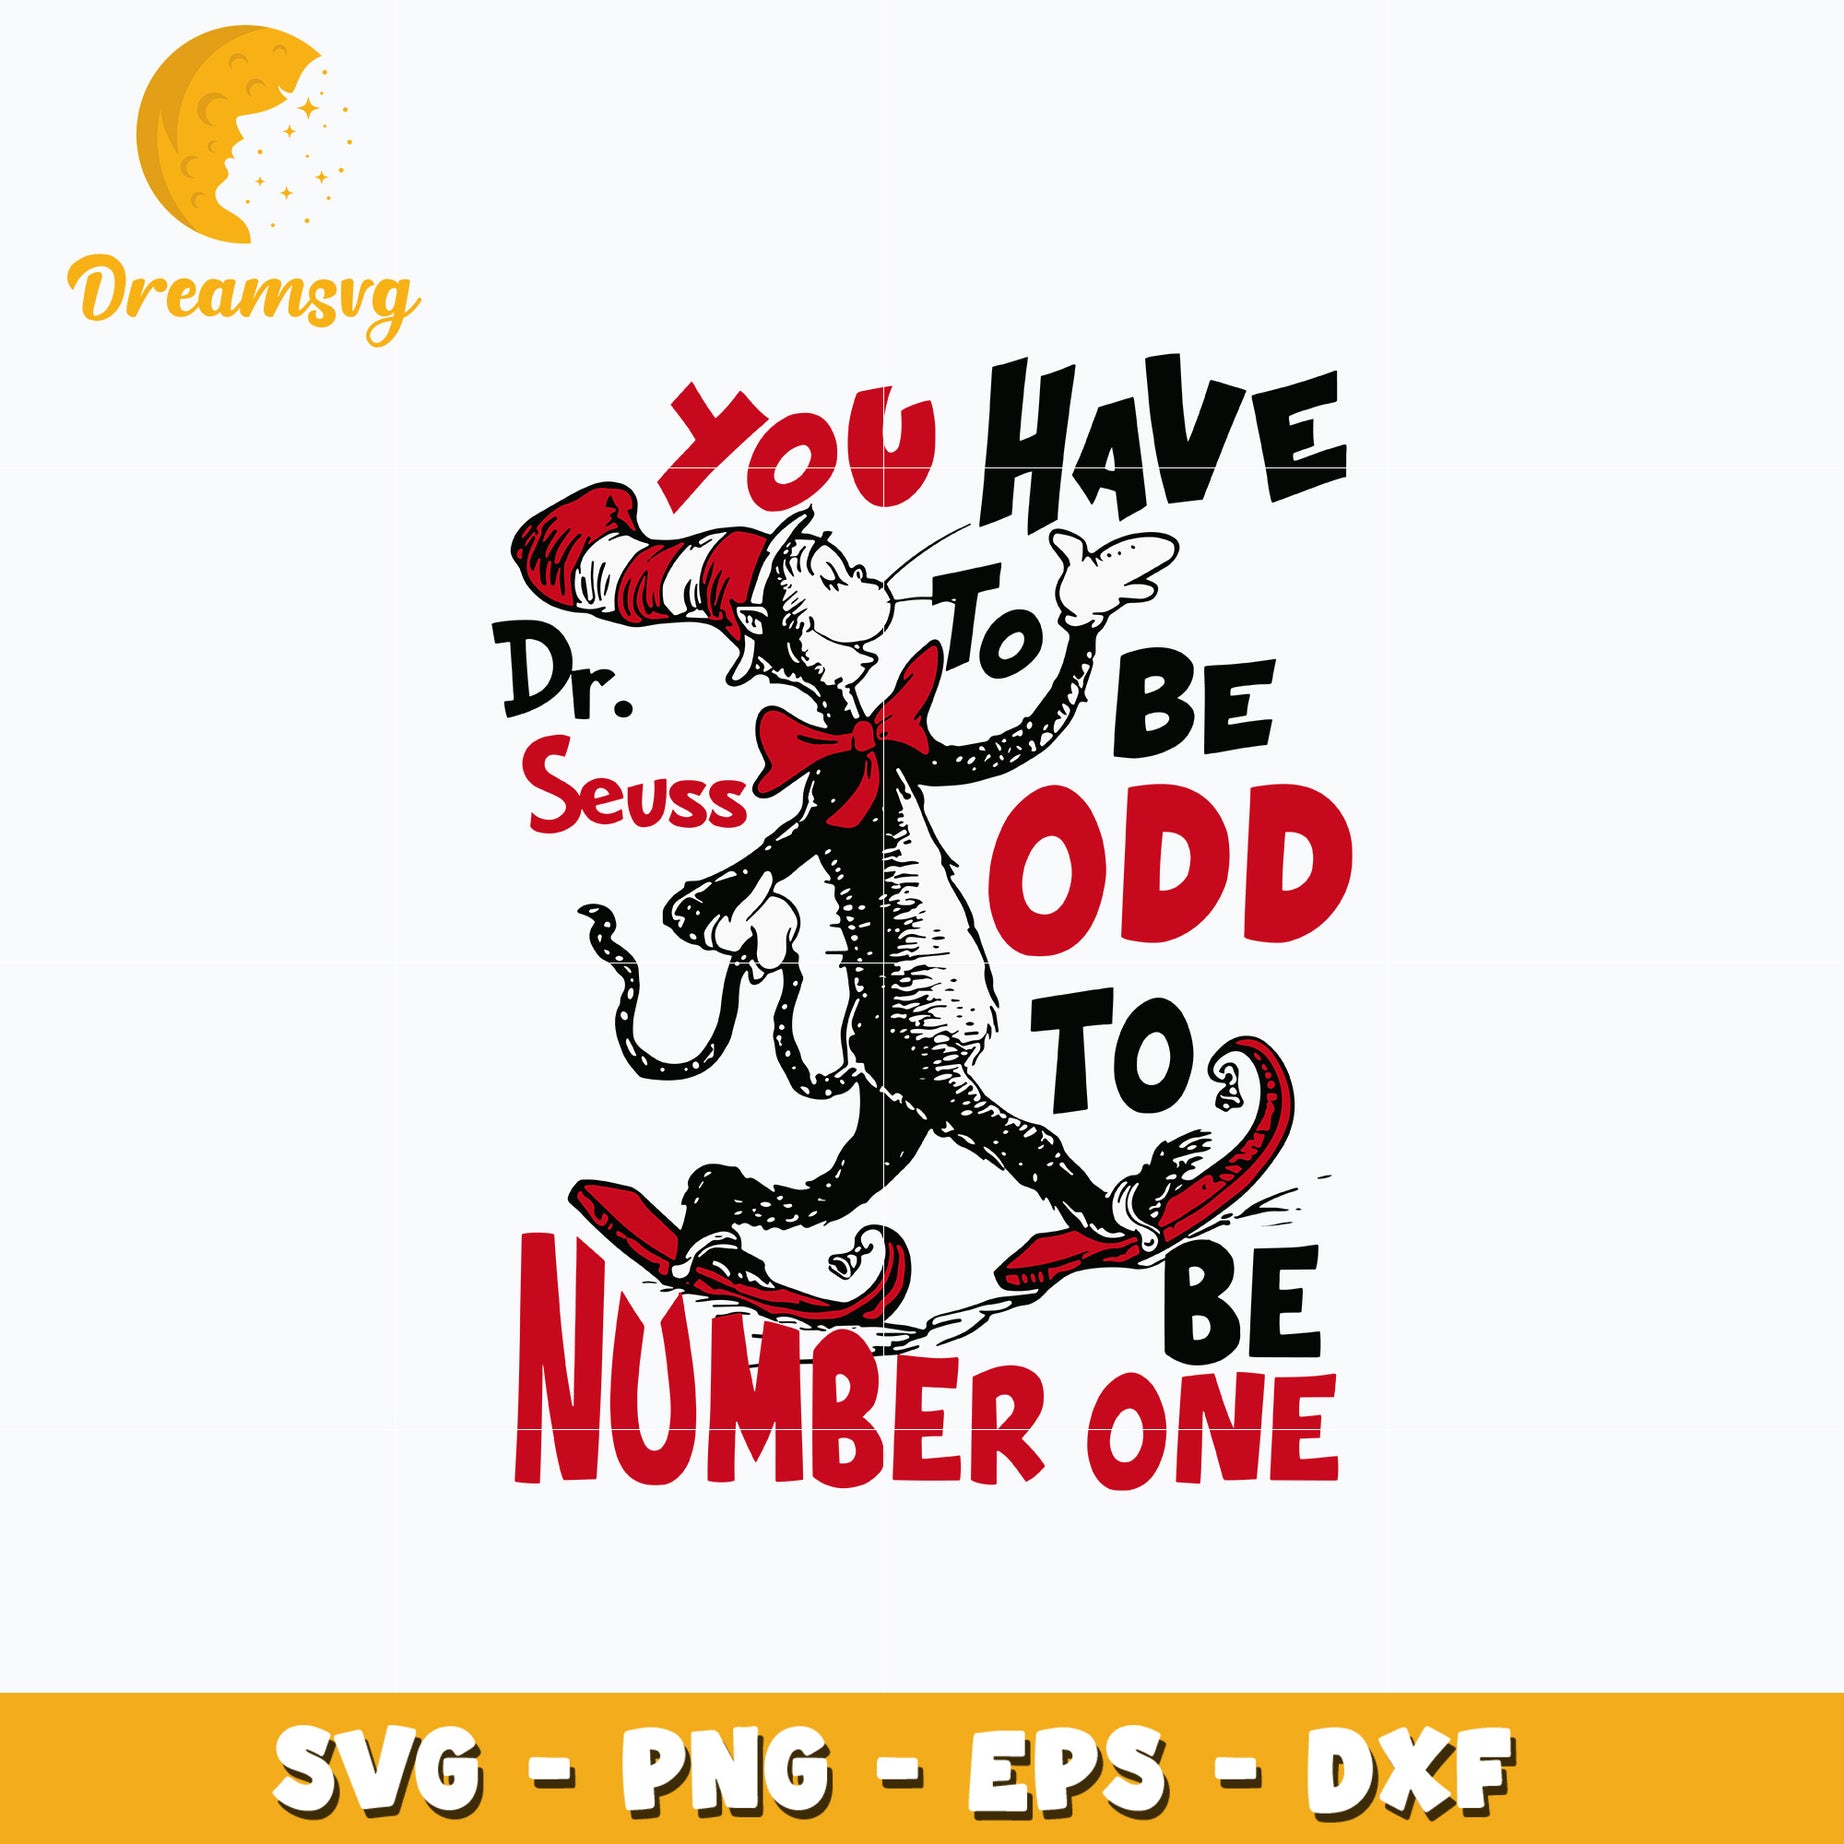 Dr Seuss you have to be odd svg – DreamSVG Store